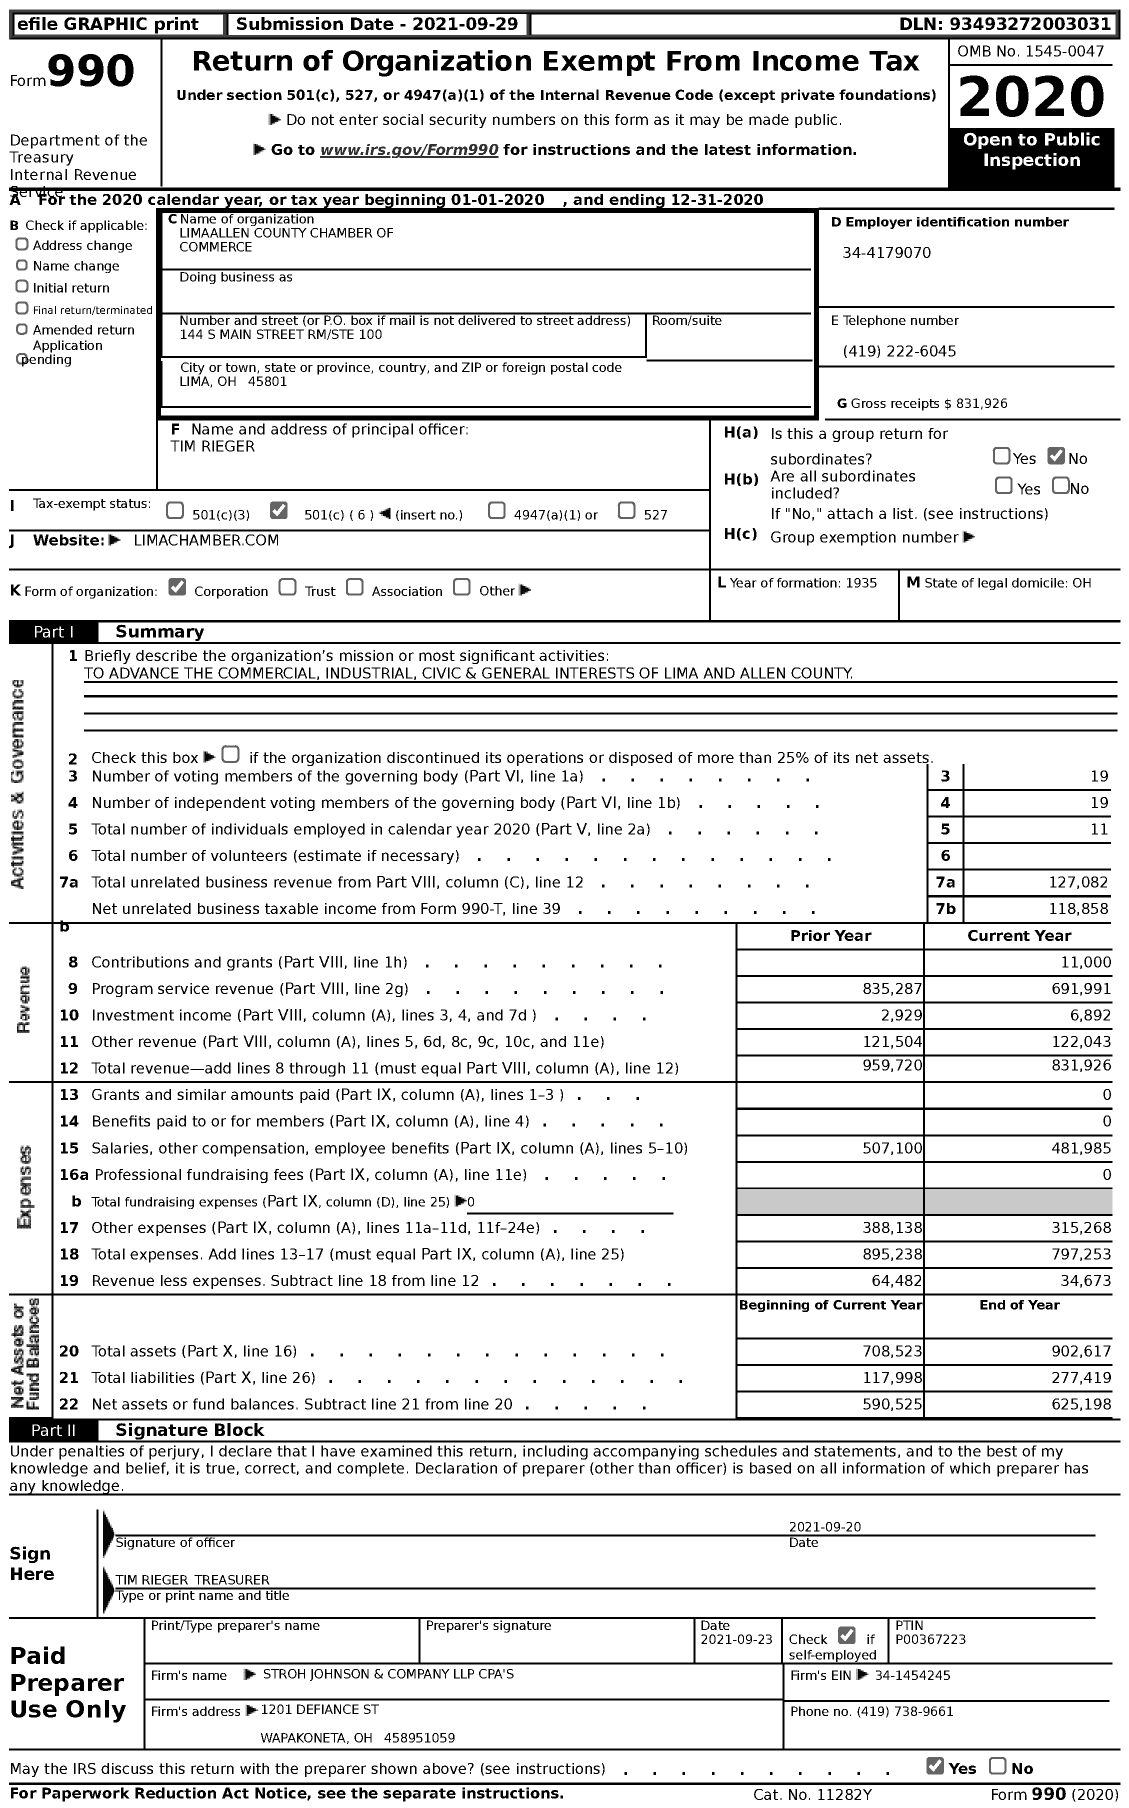 Image of first page of 2020 Form 990 for Limaallen County Chamber of Commerce